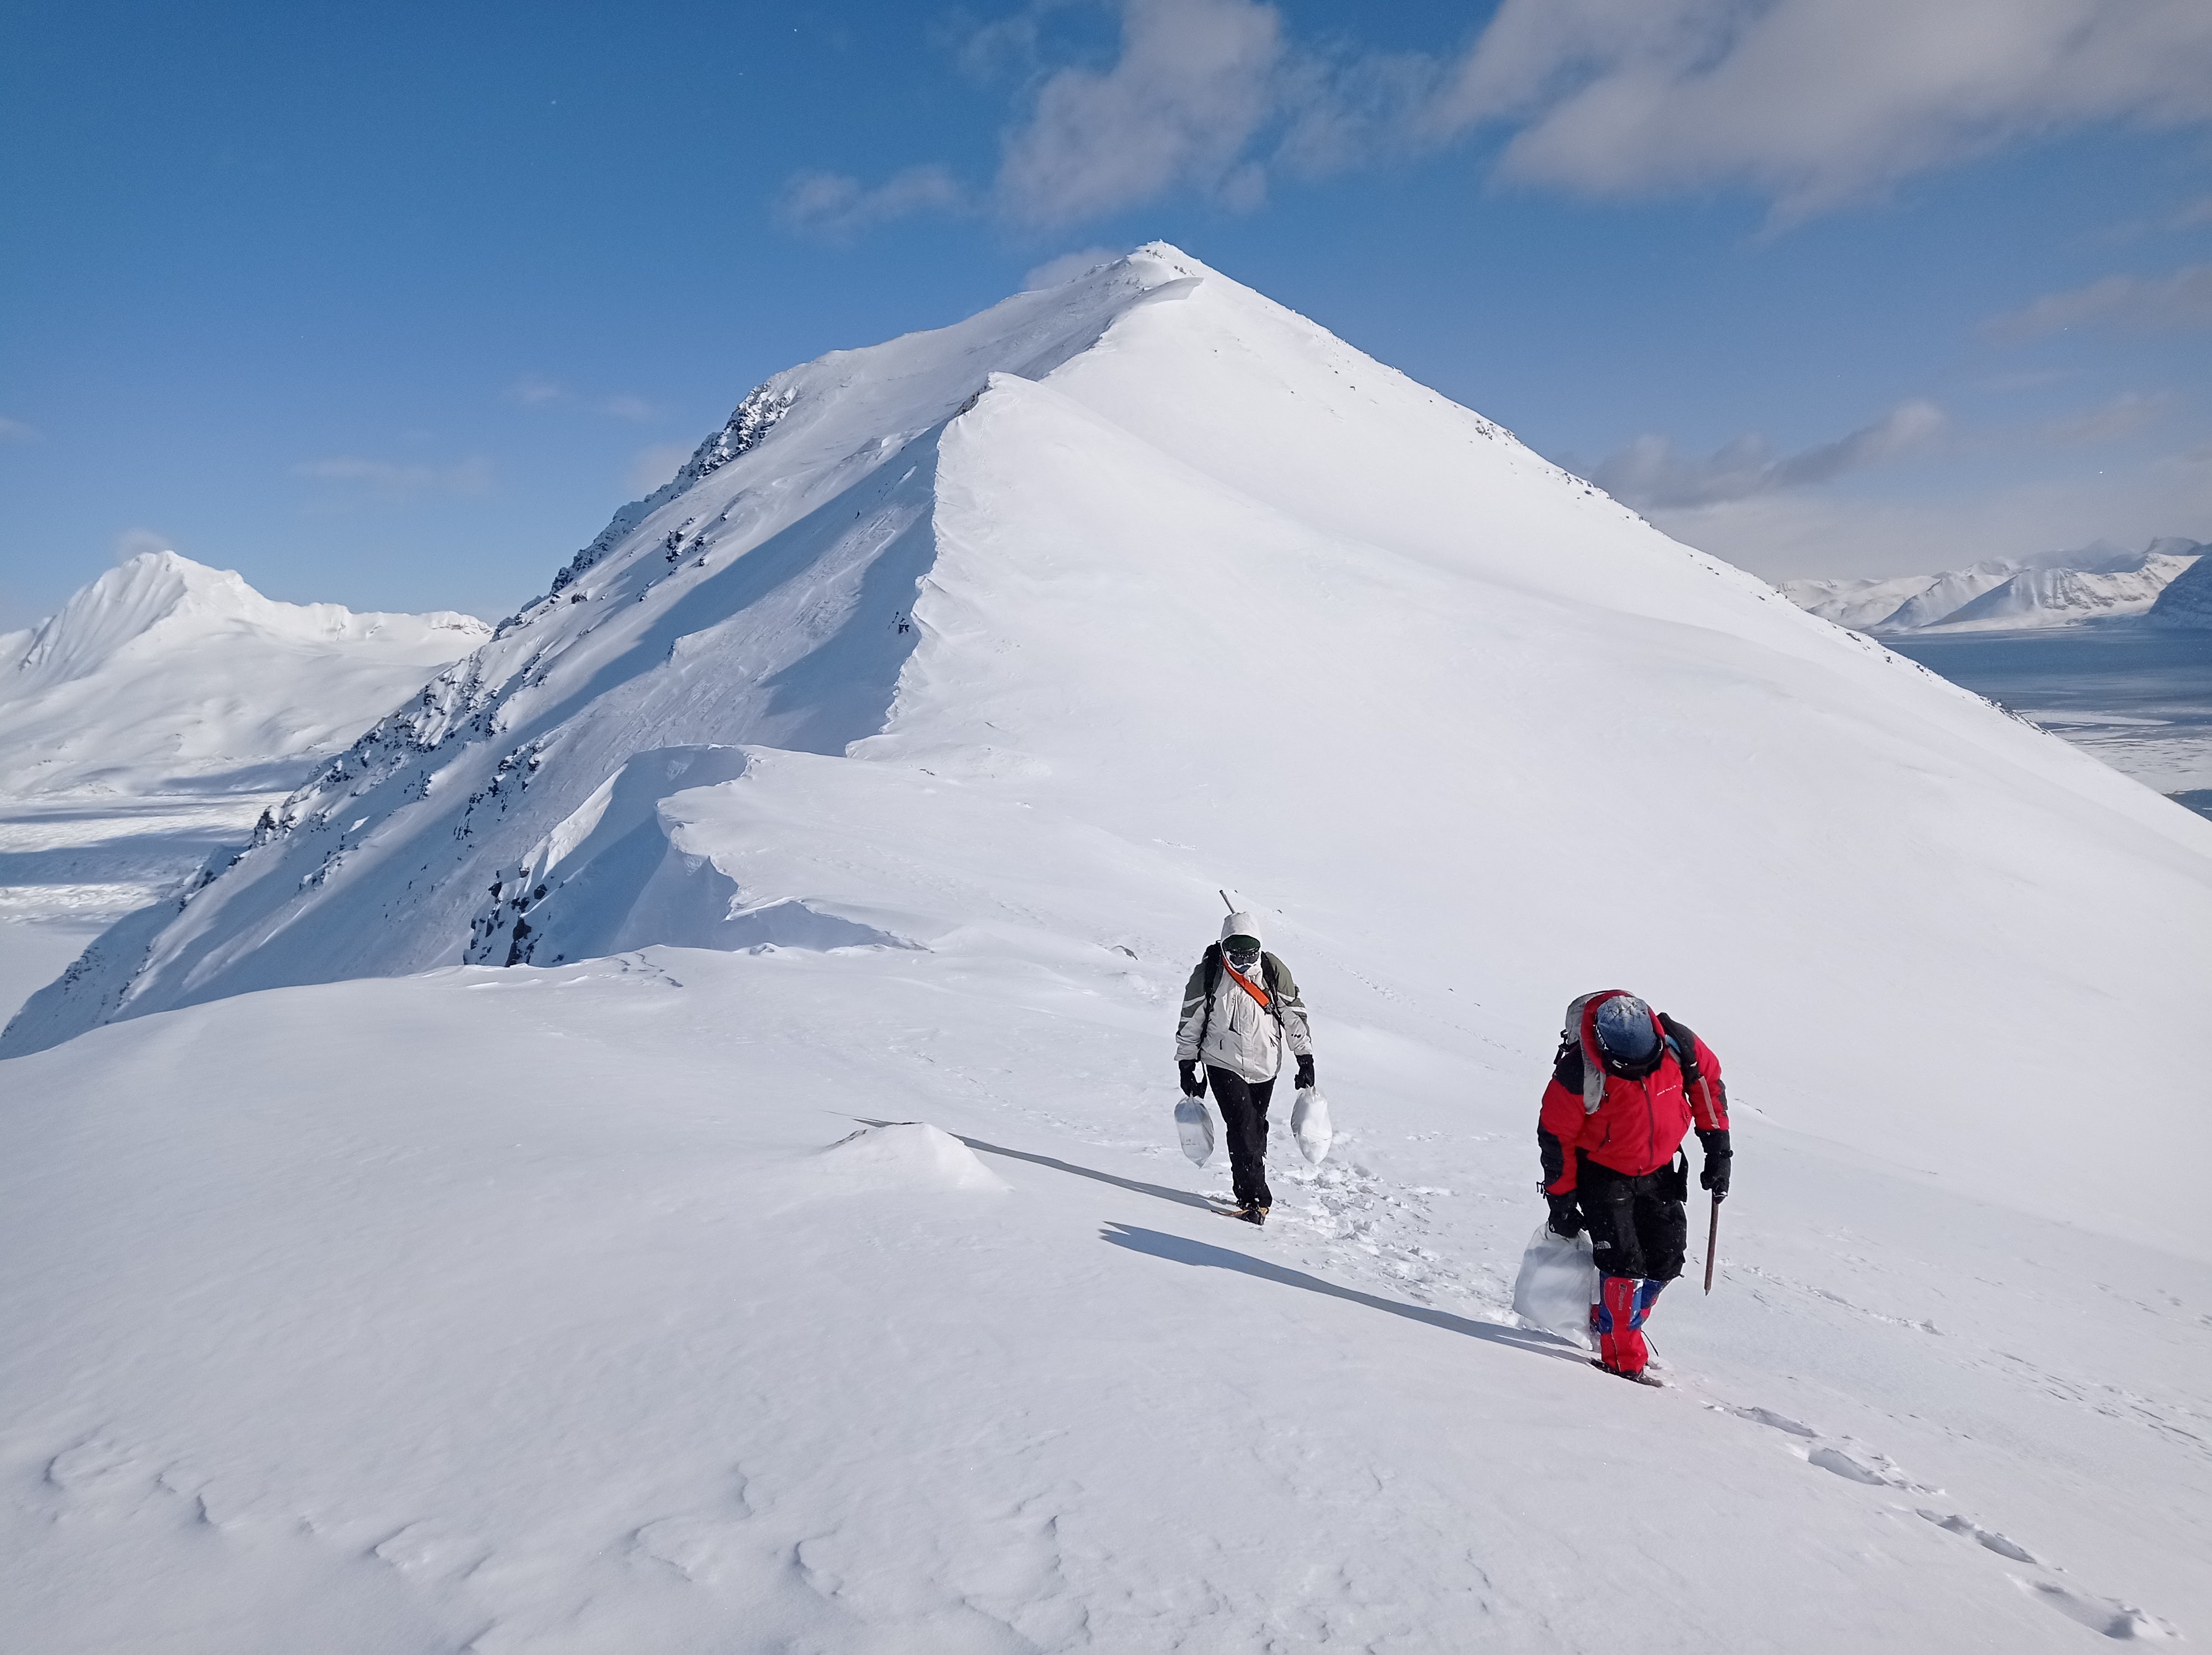 Two people walking on a snowy mountain carrying bags of snow